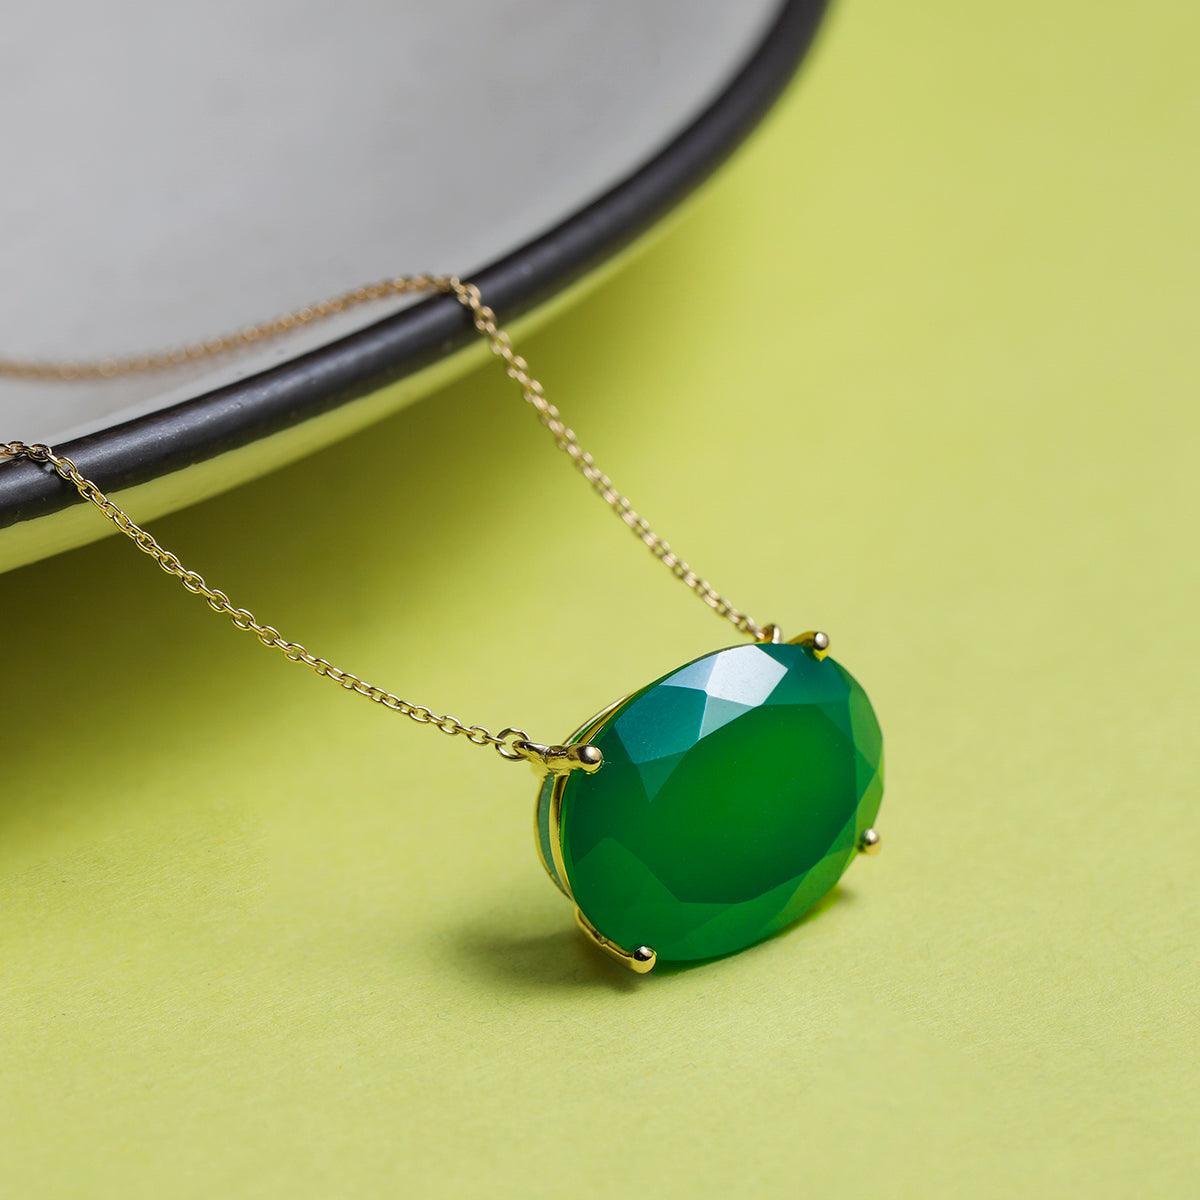 Green Onyx Necklace 14K Gold Over 925 Silver Chain Pendant Necklace Jewelry - YoTreasure